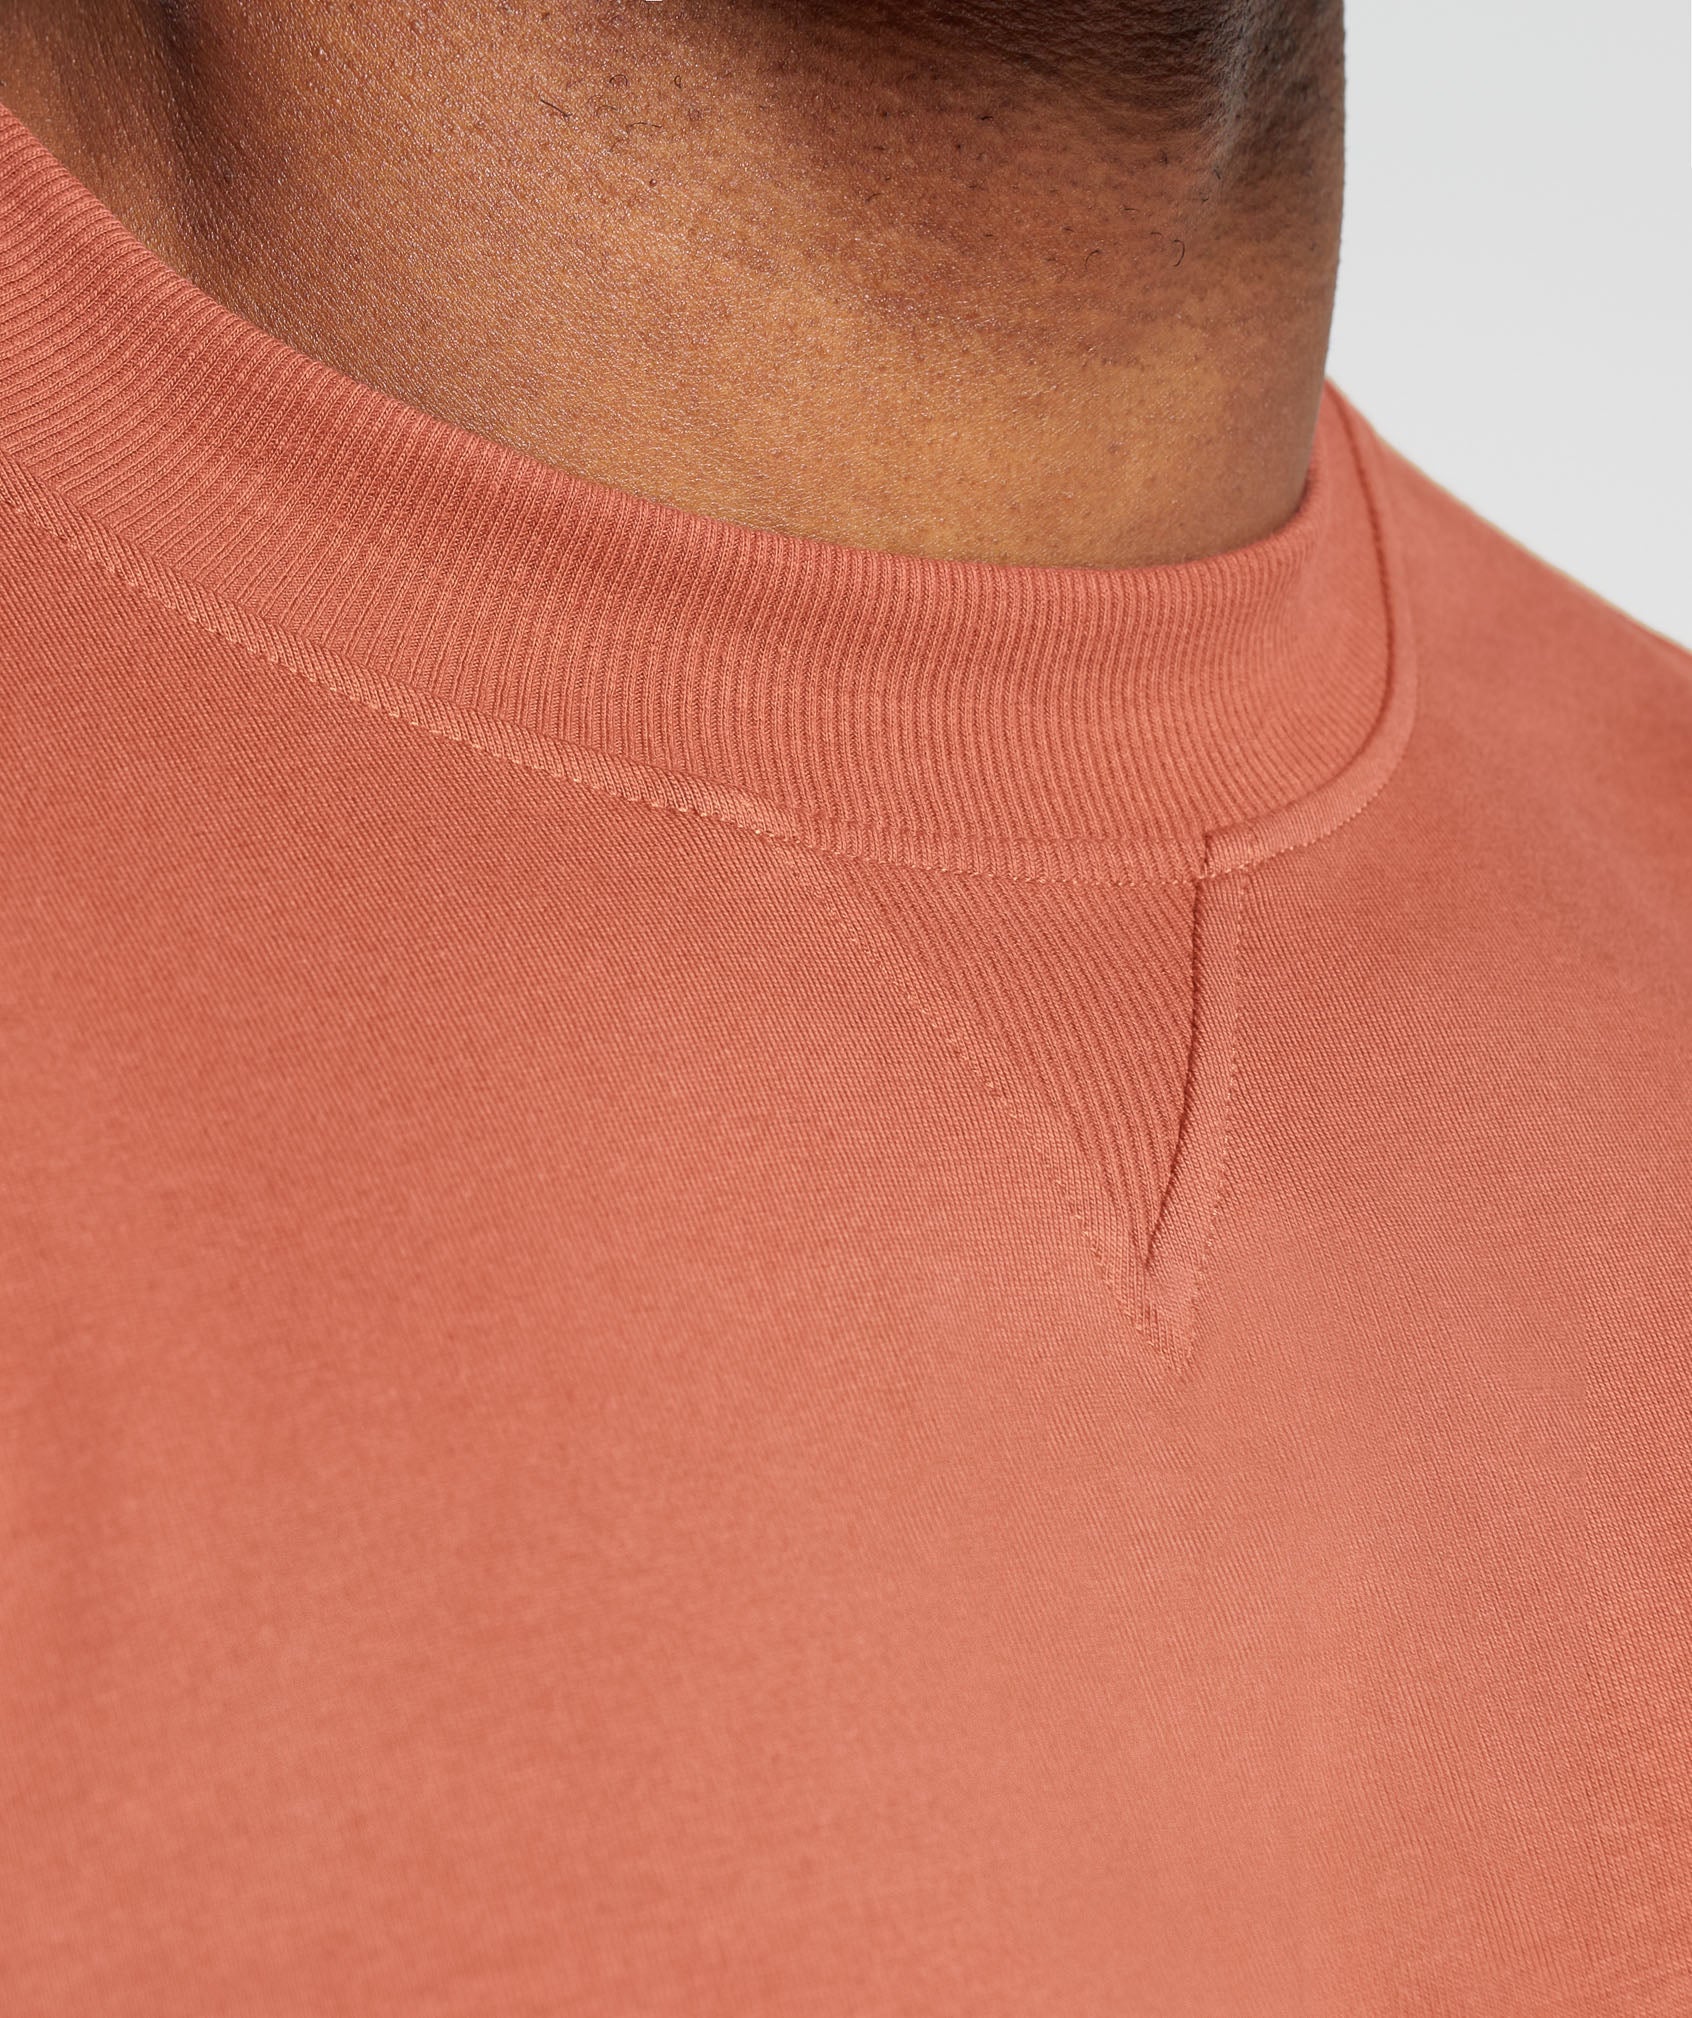 Rest Day Essentials T-Shirt in Persimmon Red - view 6